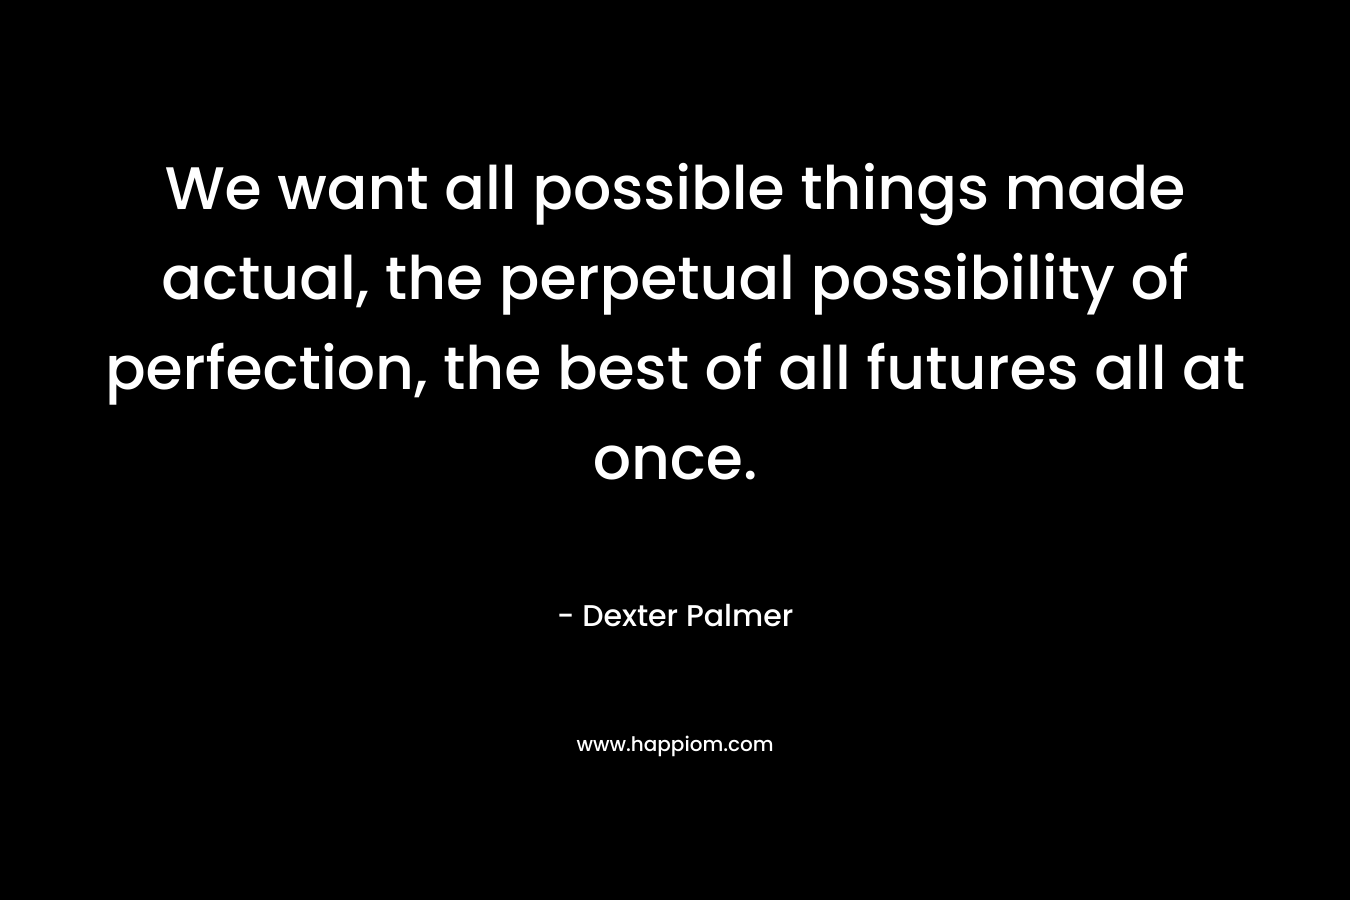 We want all possible things made actual, the perpetual possibility of perfection, the best of all futures all at once. – Dexter Palmer